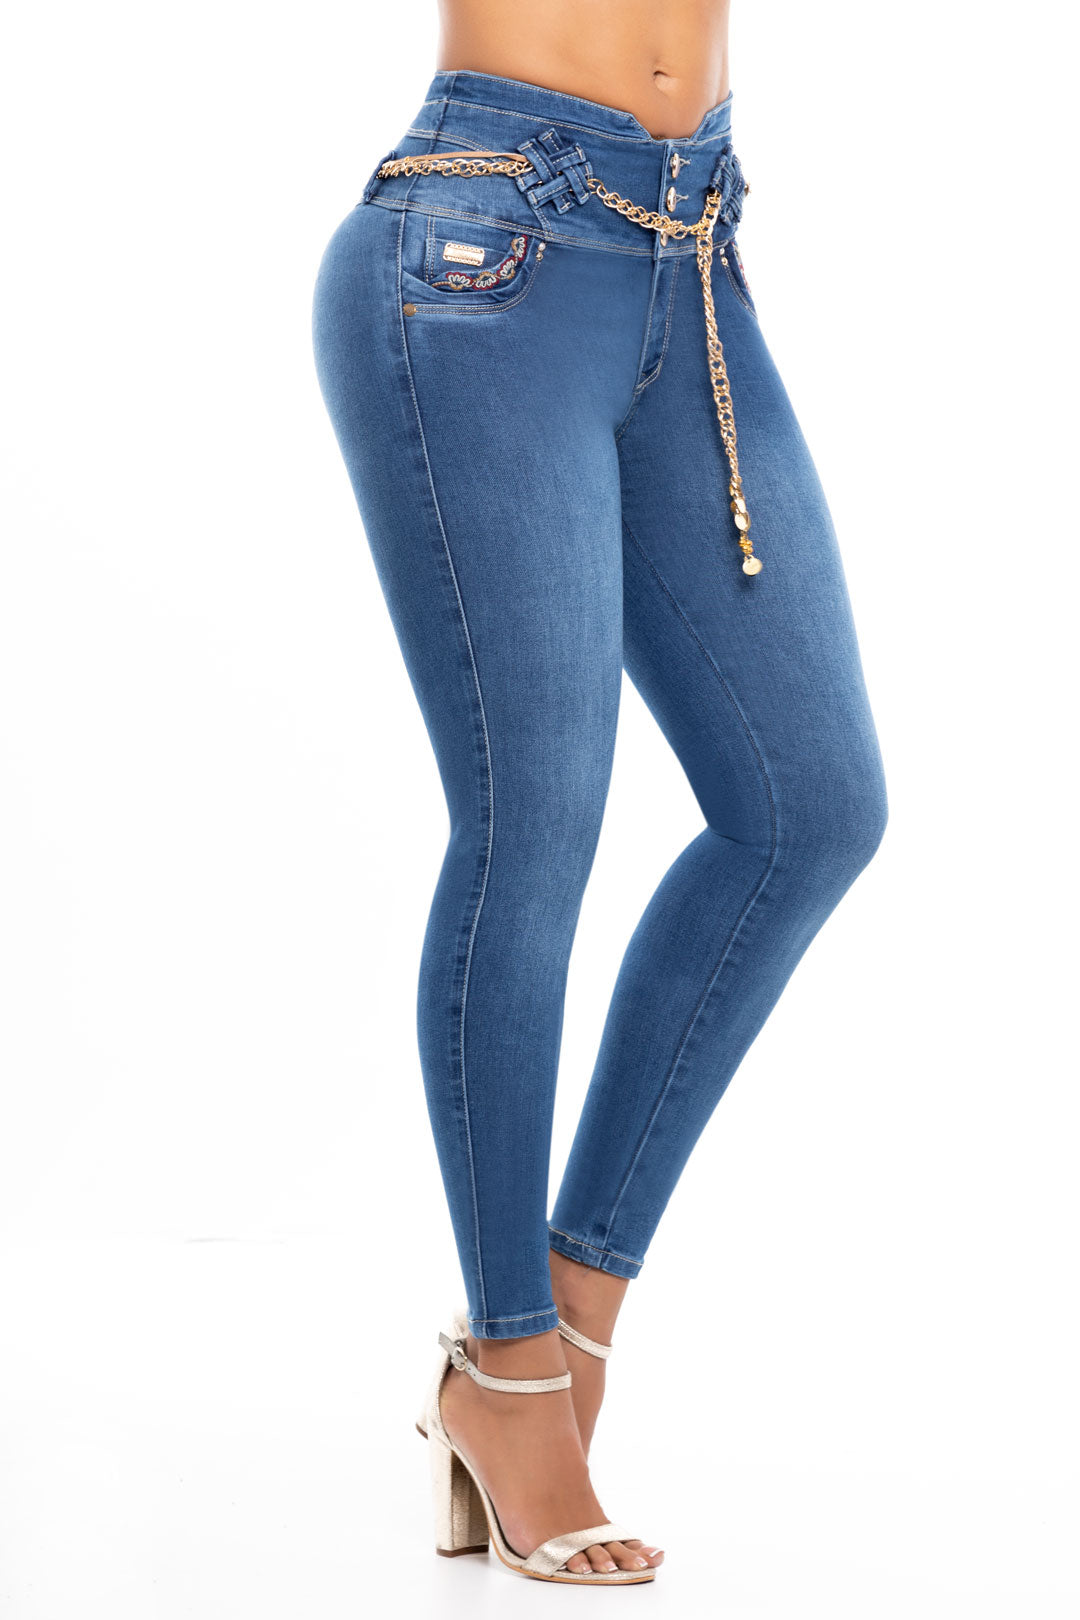  Top Woman Jeans Colombianos Levanta Cola Colombiano